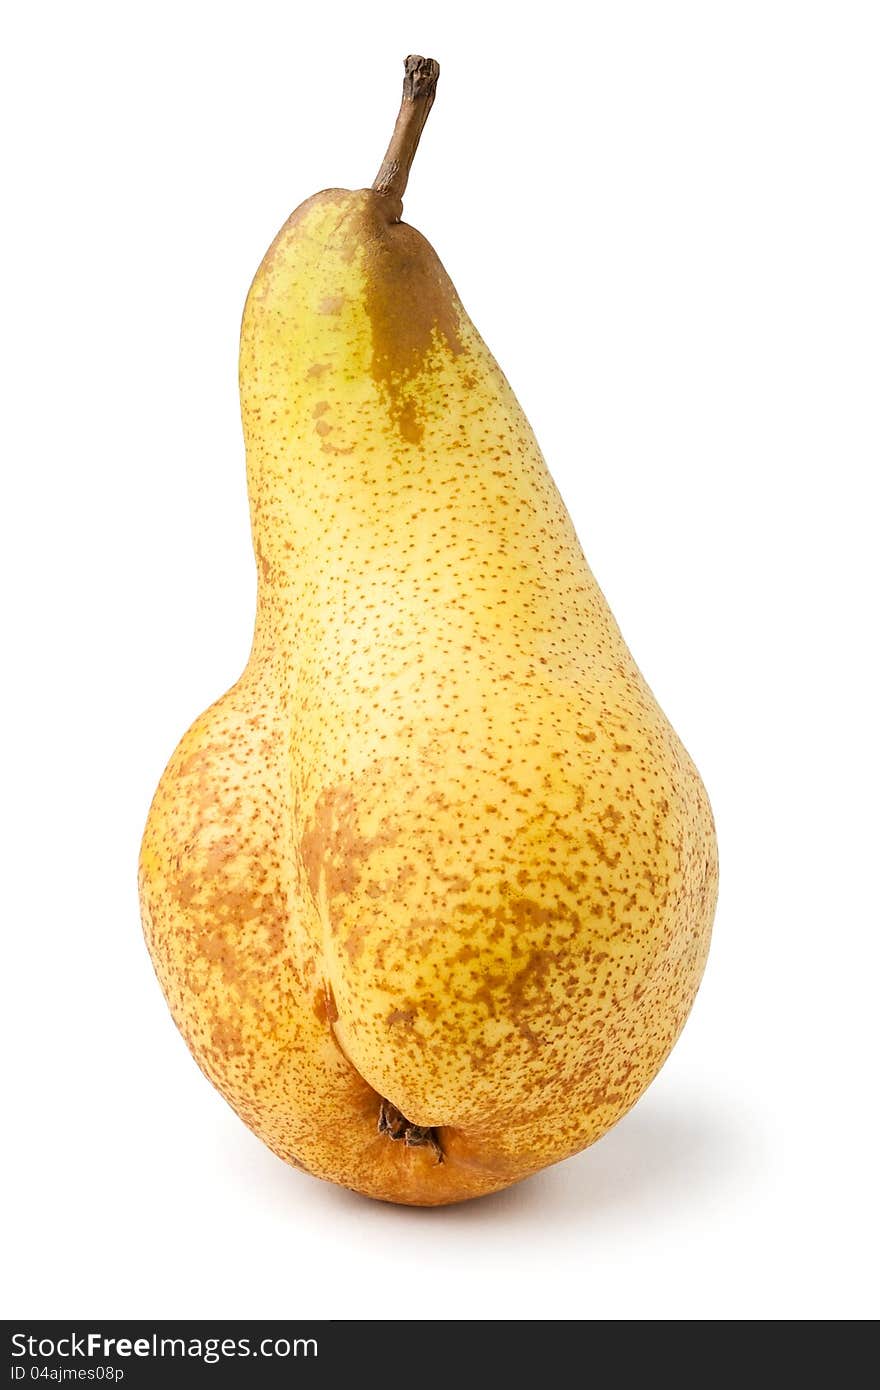 Single yellow pear against white background. Single yellow pear against white background